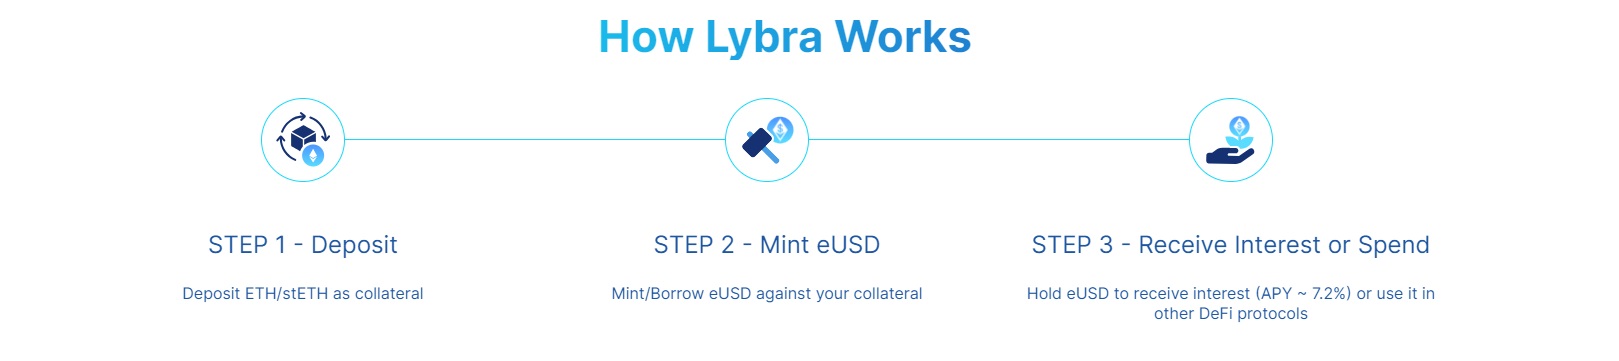 Lybra-Finance-project-and-eUSD-token-how-it-works